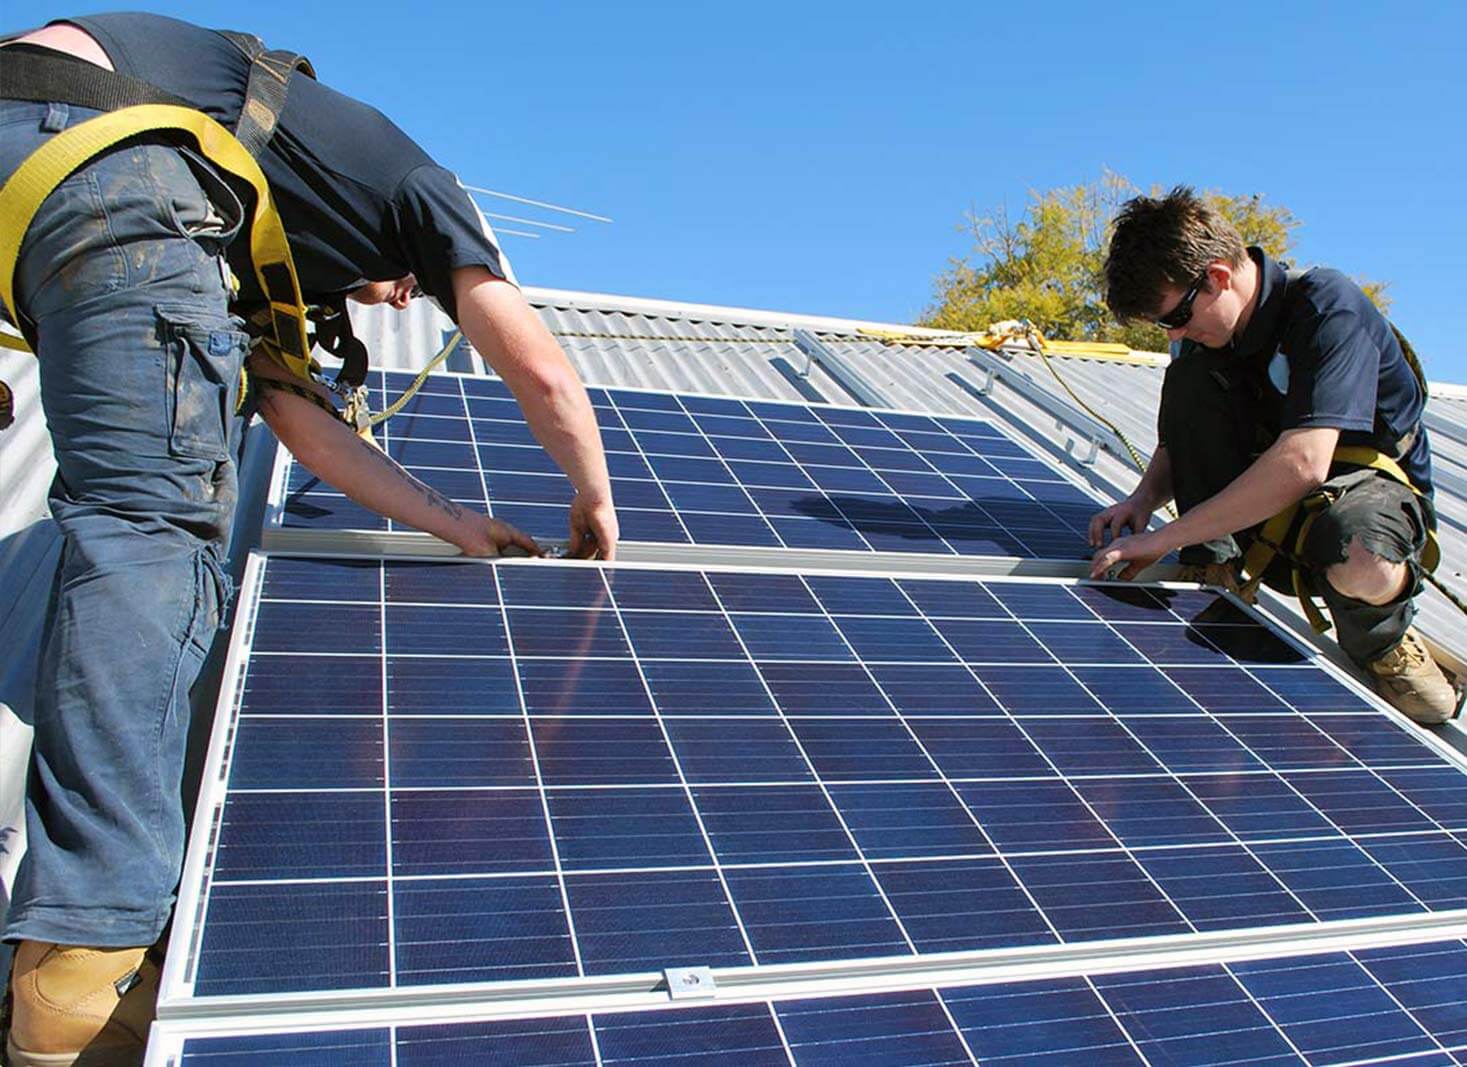 Maintenance and upgrades of a 1.5 kW solar power system